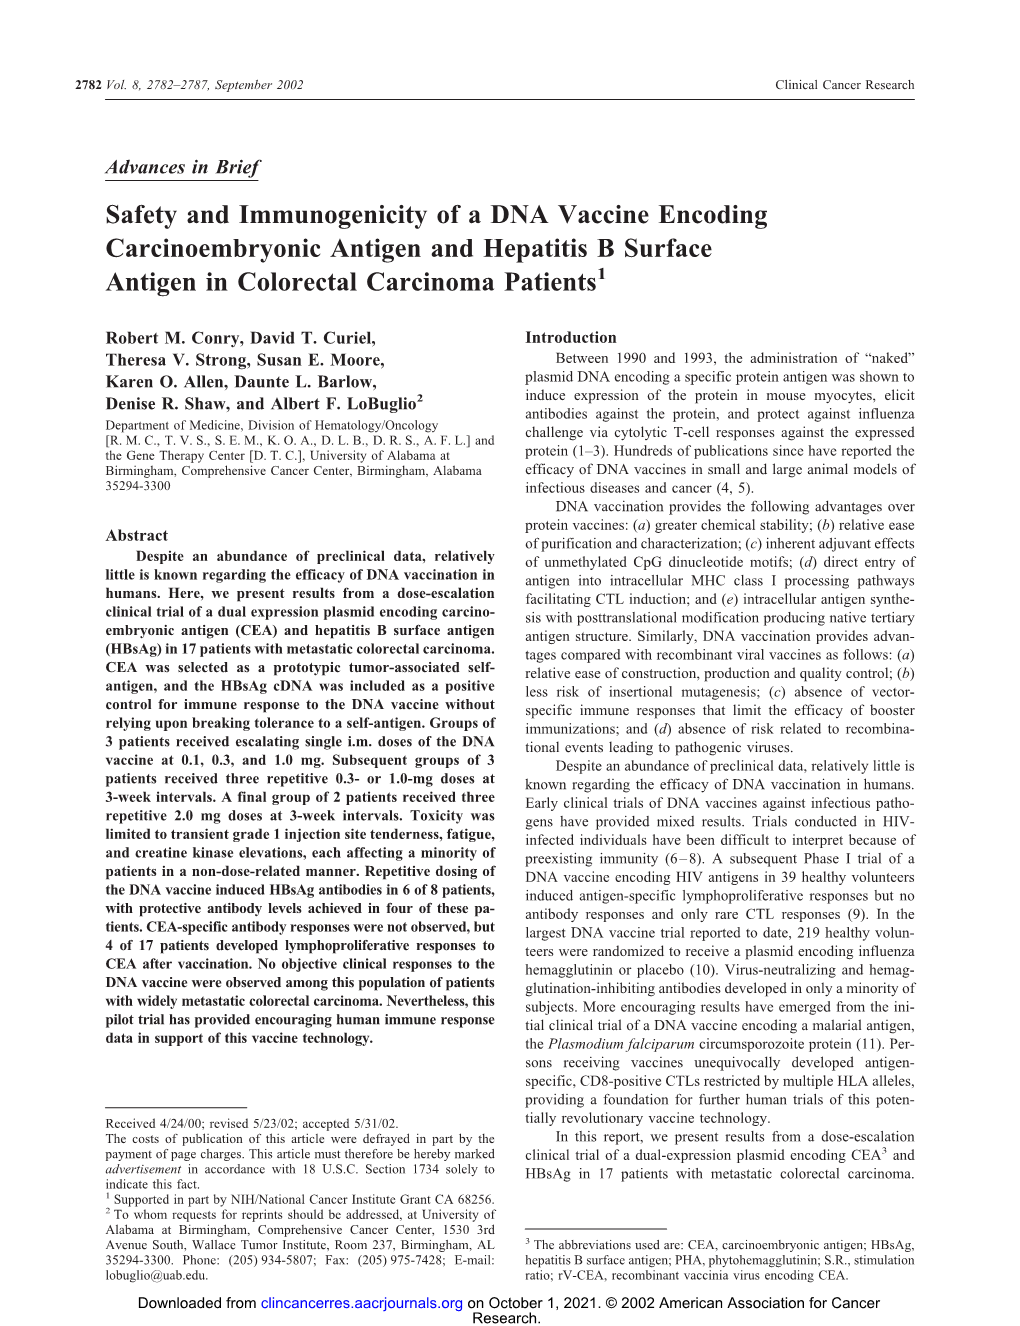 Safety and Immunogenicity of a DNA Vaccine Encoding Carcinoembryonic Antigen and Hepatitis B Surface Antigen in Colorectal Carcinoma Patients1